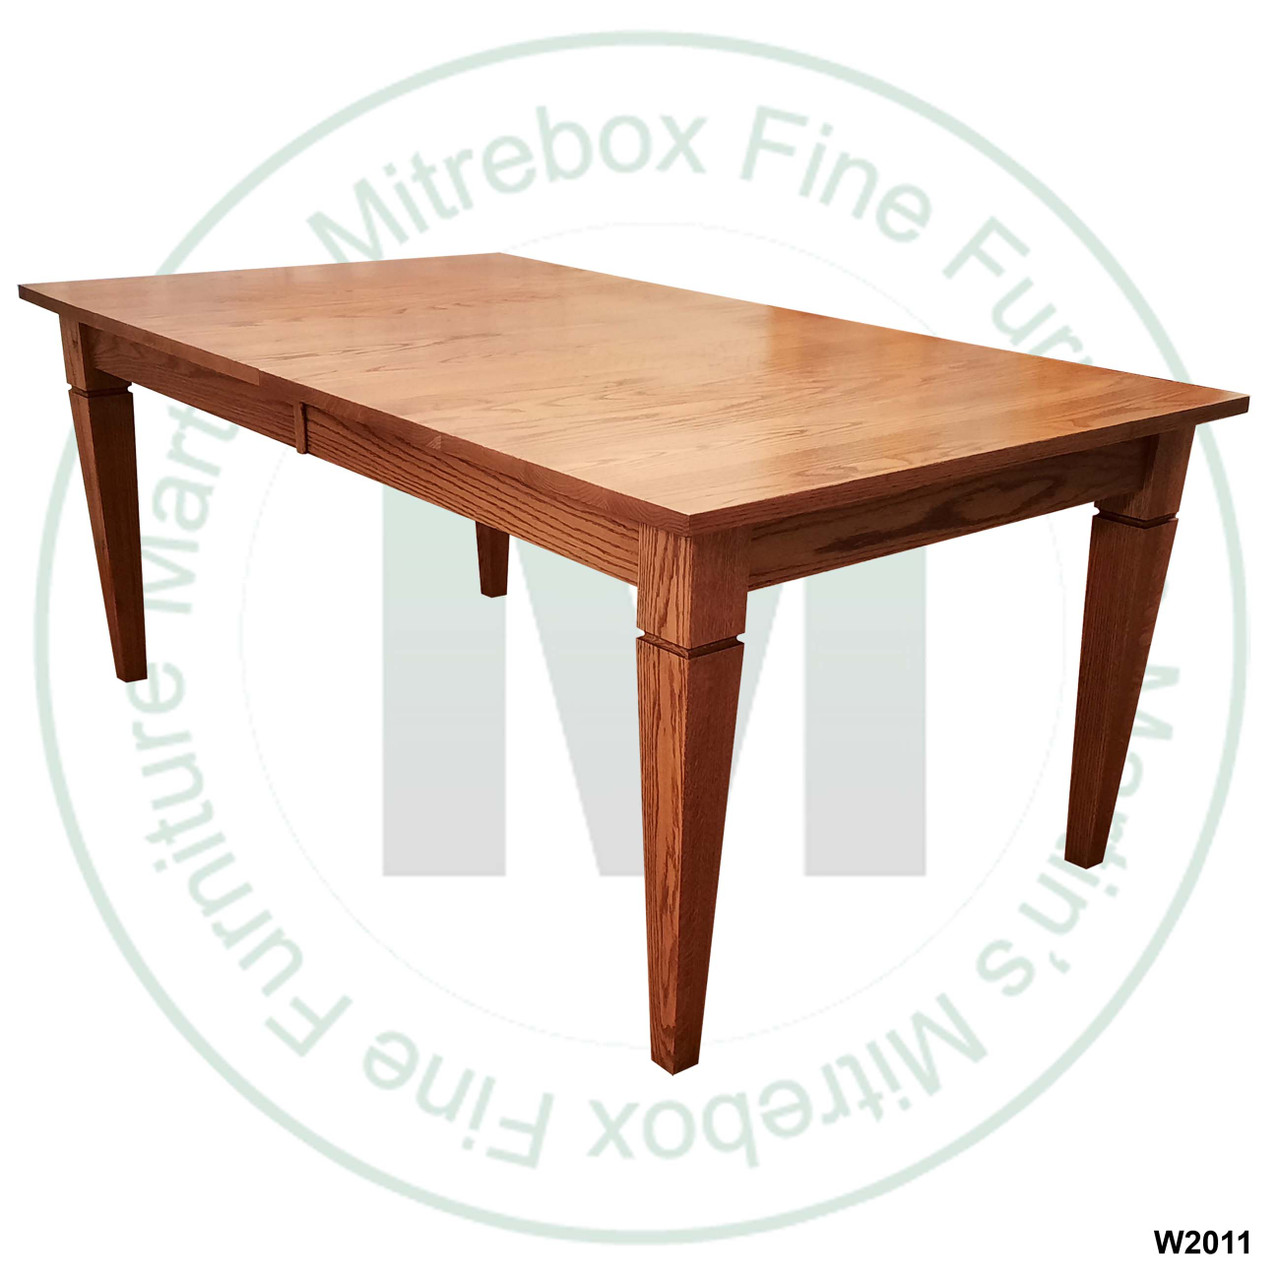 Oak Reesor Solid Top Harvest Table 36''D x 72''W x 30''H Table Has 1 3/4'' Thick Top And 2 - 16'' Extensions